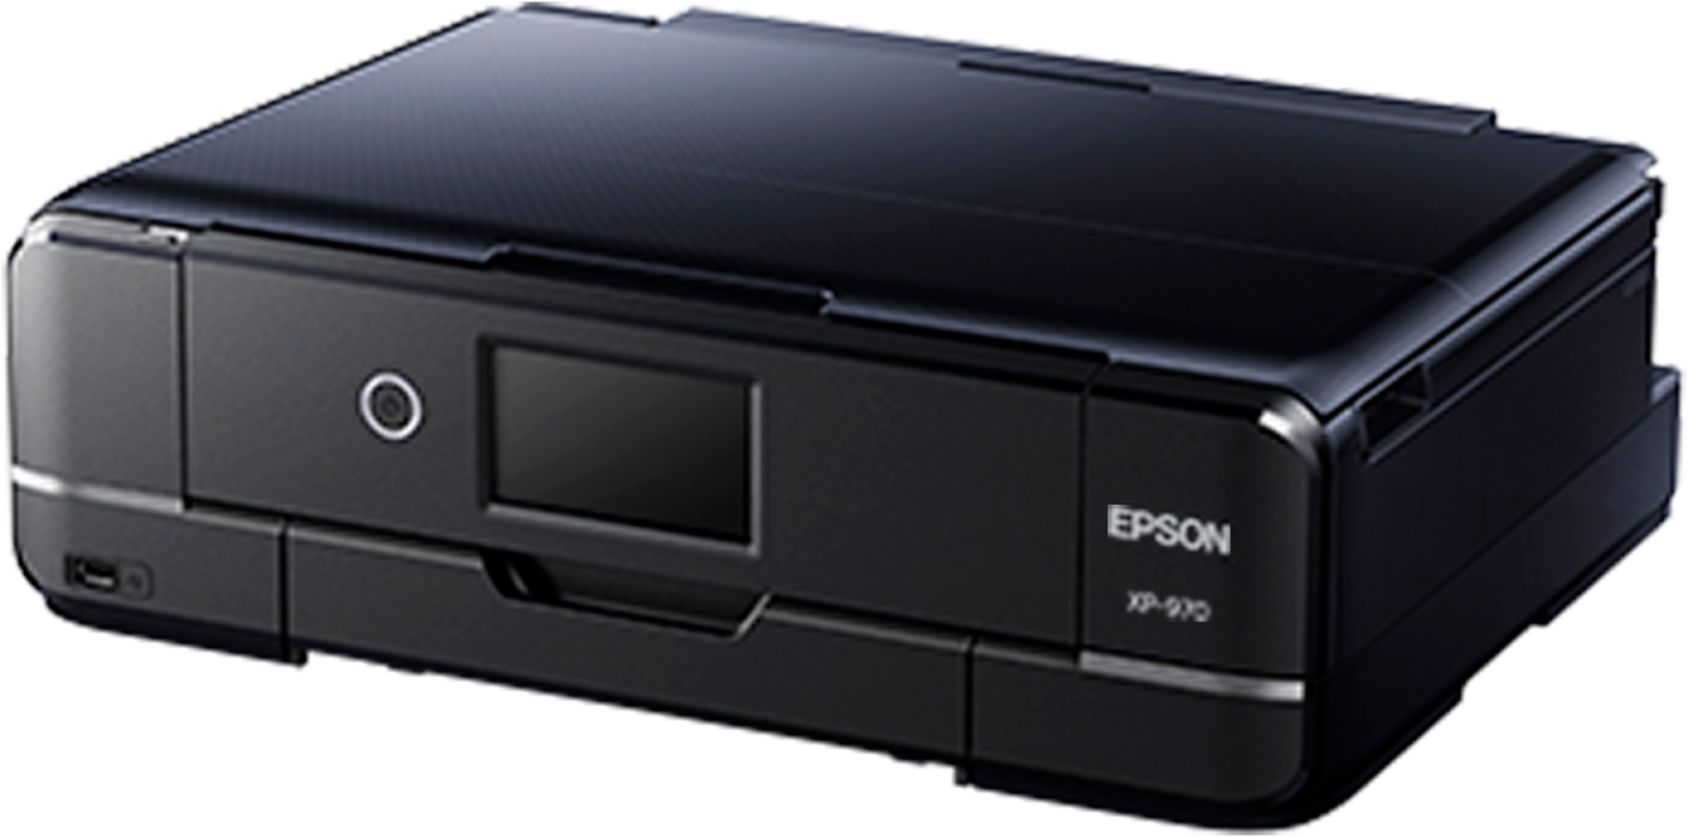 Expression Photo XP-970 Wireless All-In-One Printer EXPRESSION XP-970 AIO PR - Best Buy